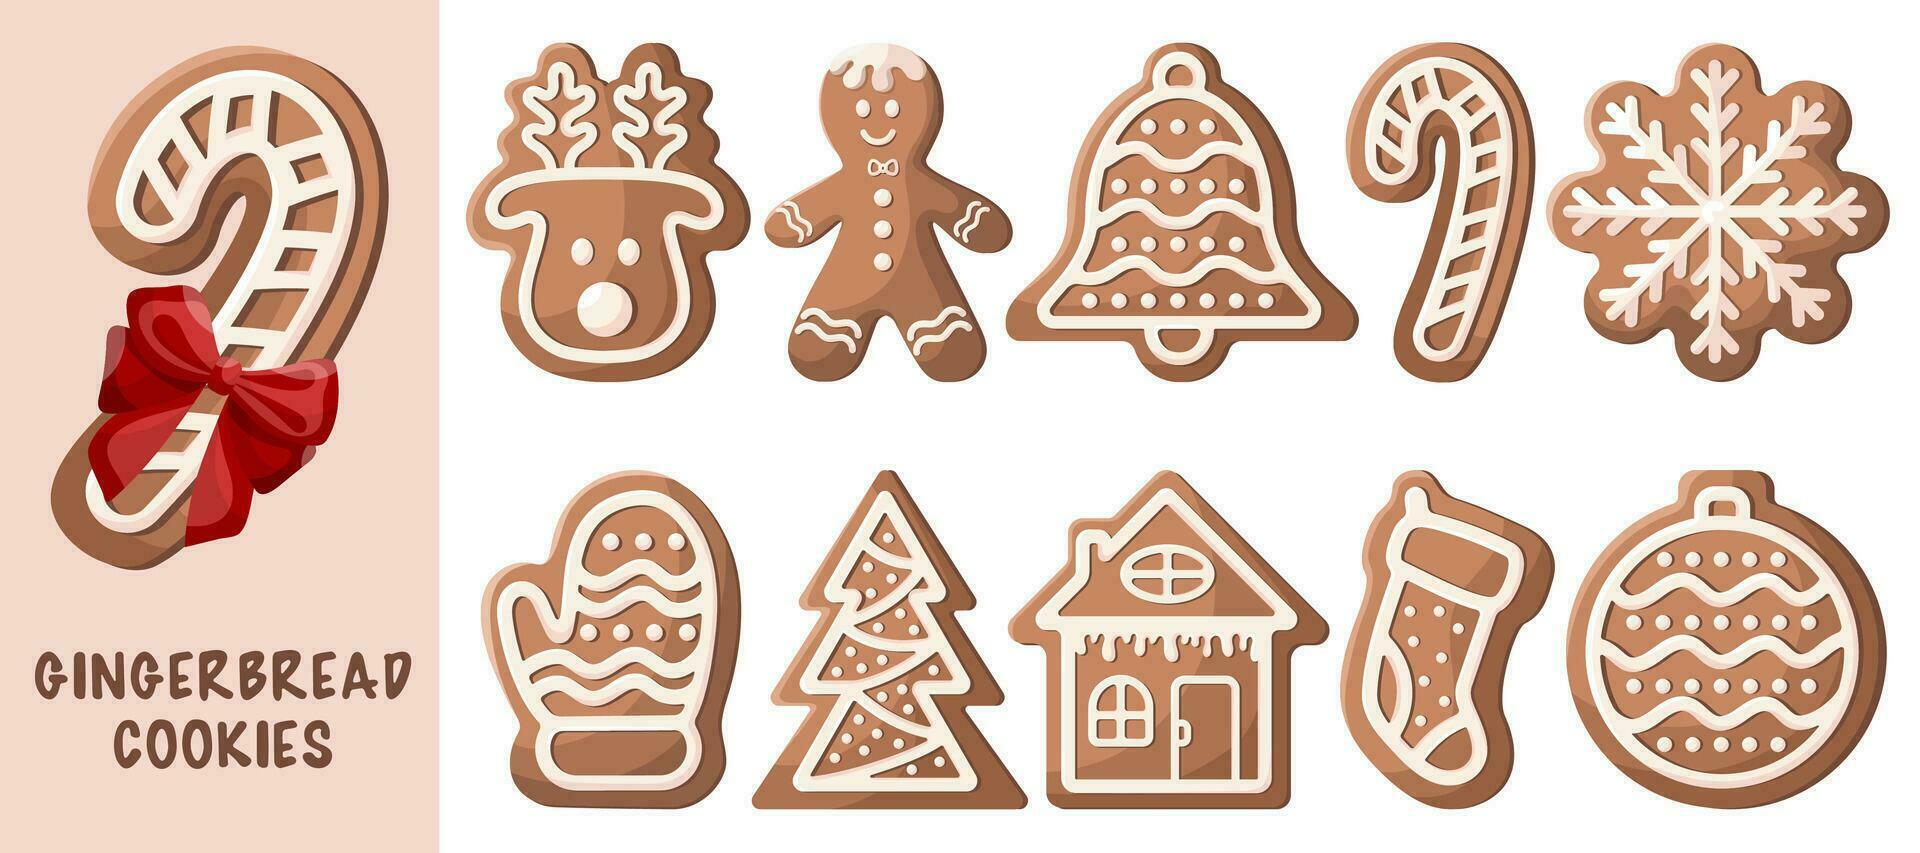 Set of cartoon vector illustrations of gingerbread cookies. Winter homemade sweets in shape of house, mittens, snowflakes, gingerbread man, deer, bell, tree, Christmas tree toy, candy, sock.